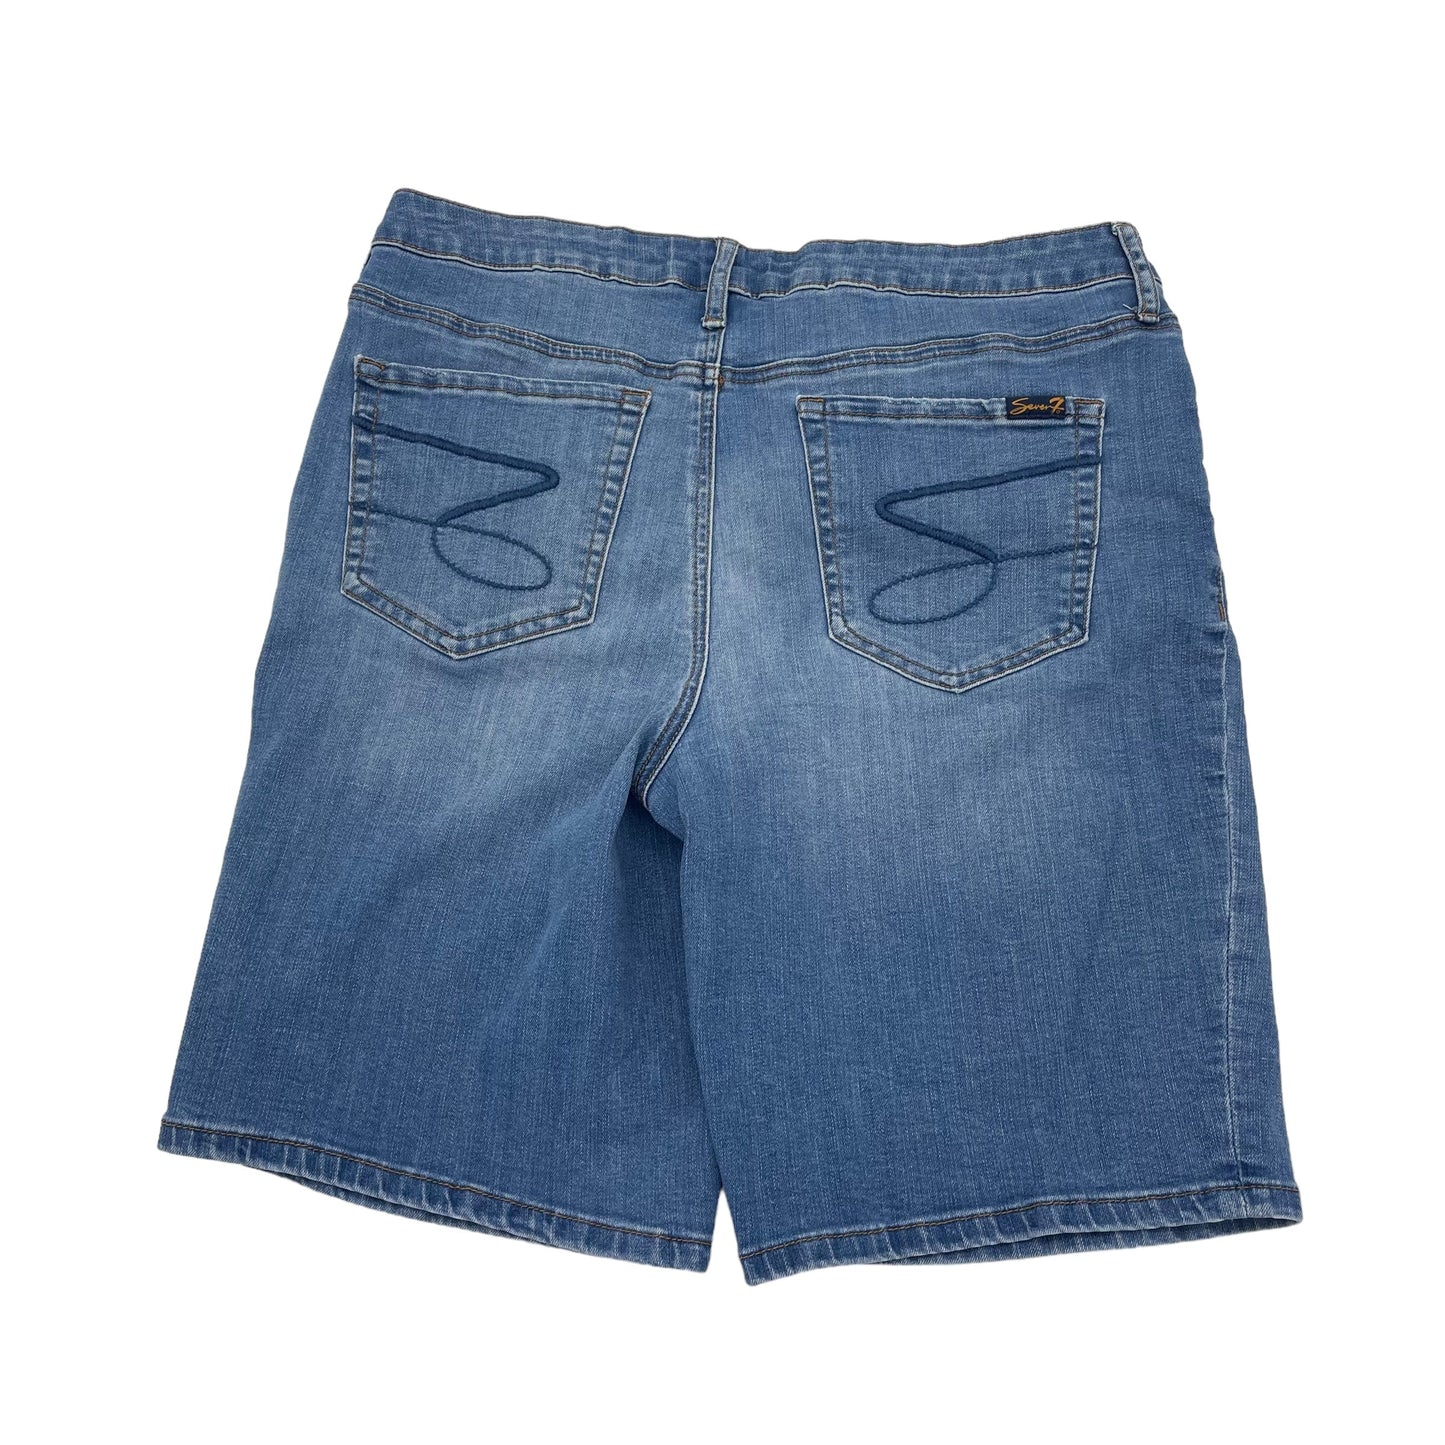 BLUE SHORTS by SEVEN 7 Size:14